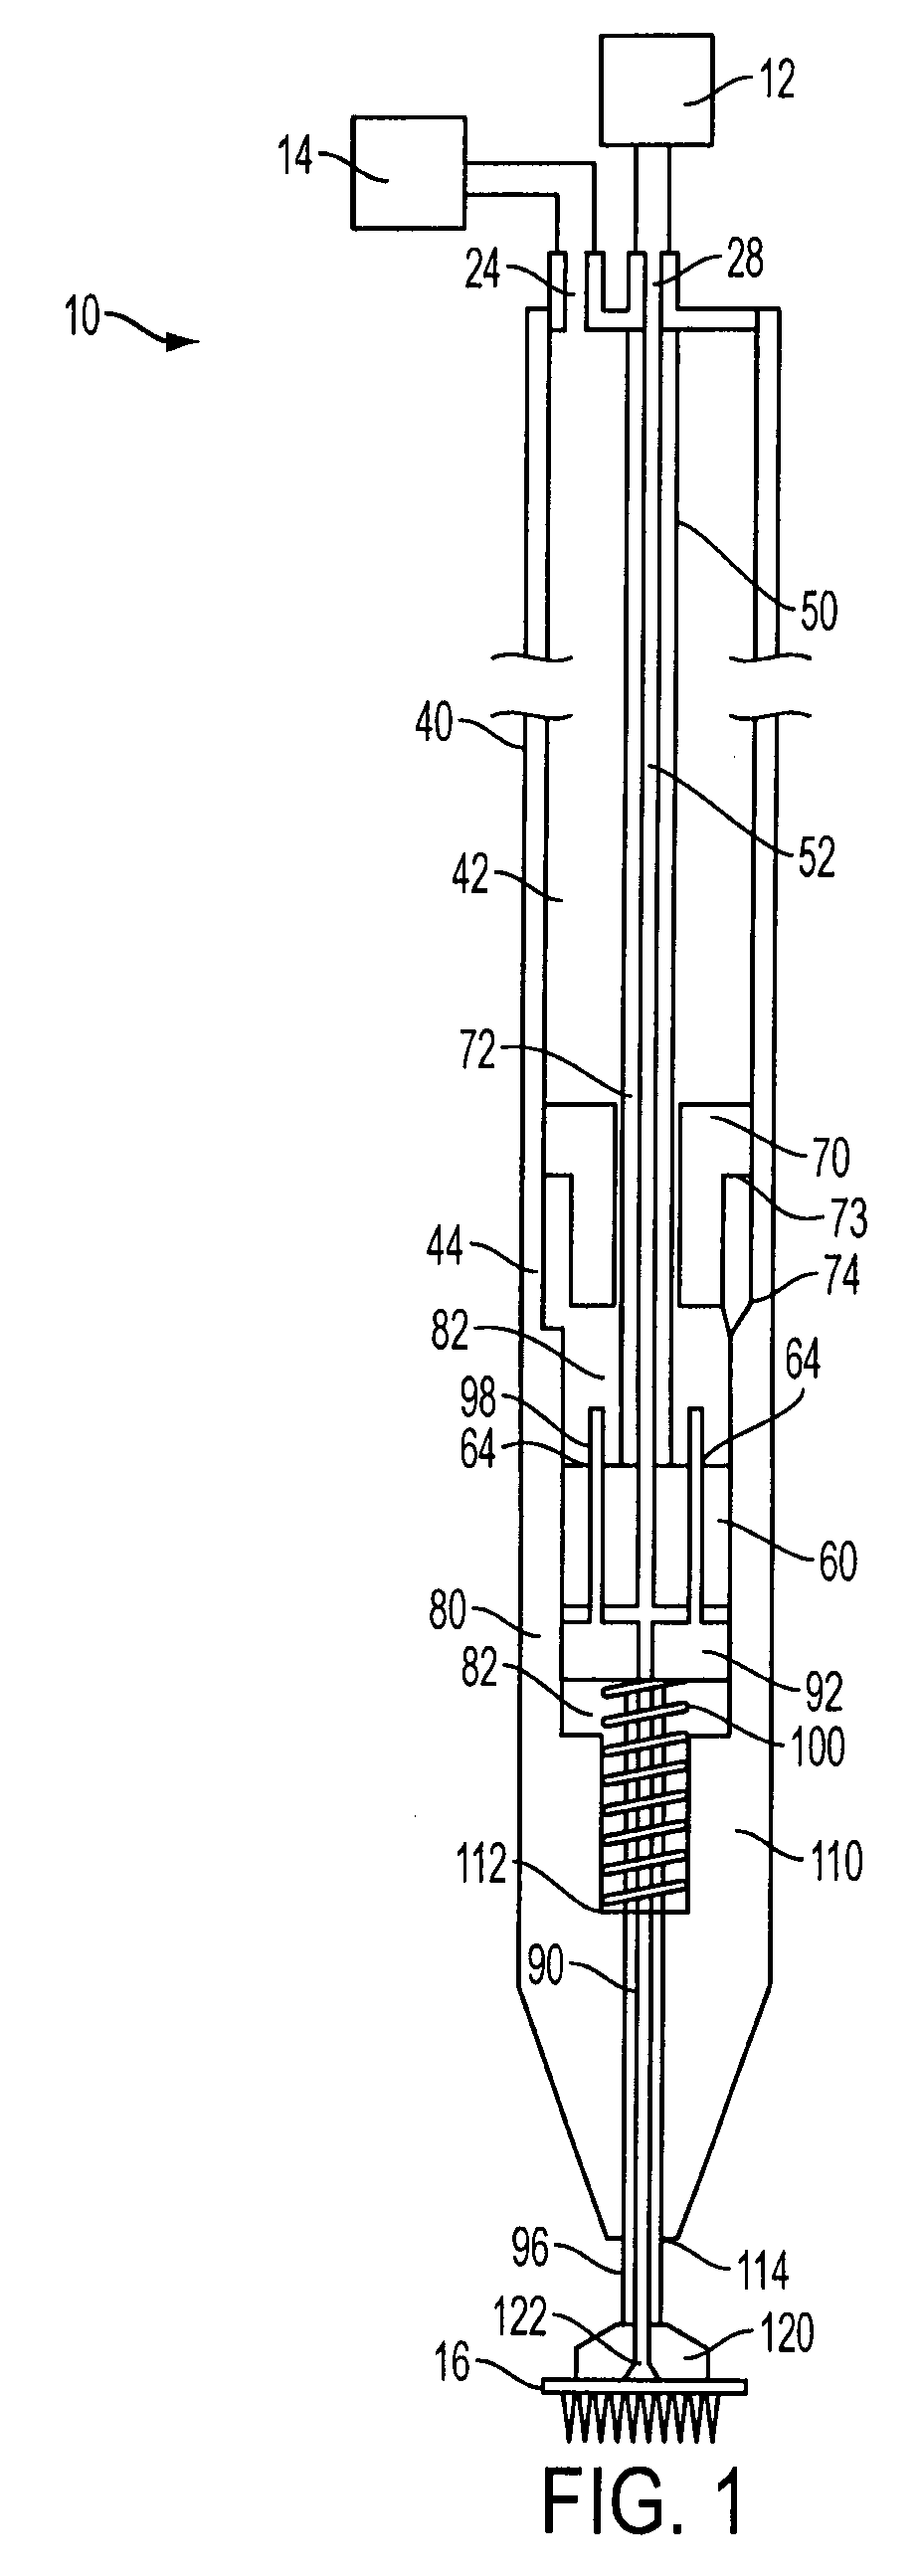 Device and Method for Manipulating and Inserting Electrode Arrays into Neural Tissues